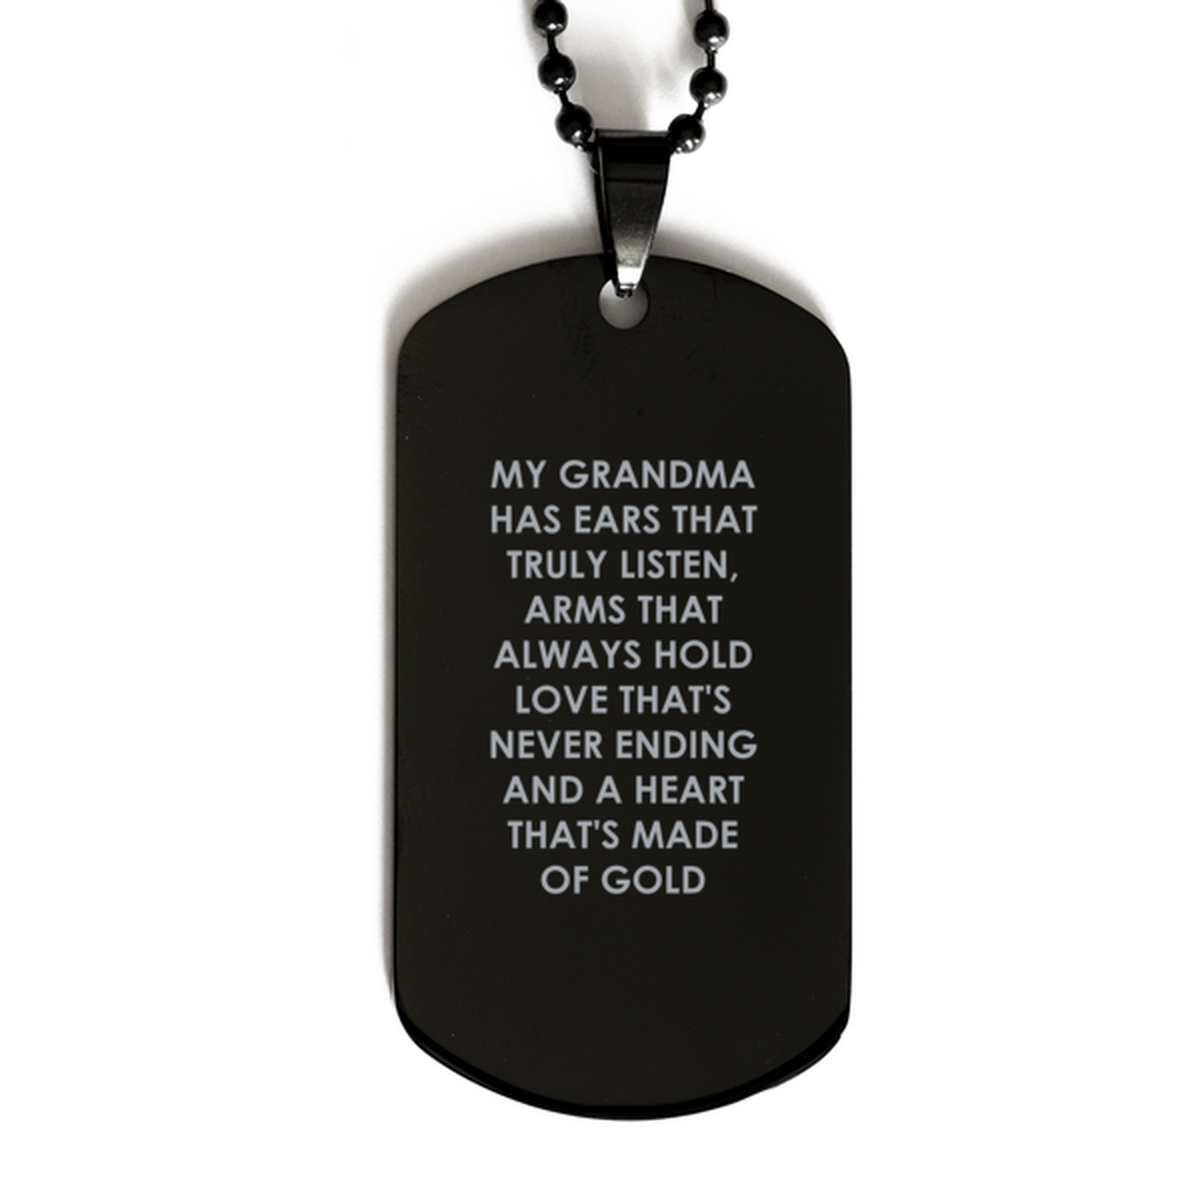 To My Grandma Black Dog Tag, Heart That's Made Of Gold, Mothers Day Gifts For Grandma From Granddaughter, Birthday Gifts For Women